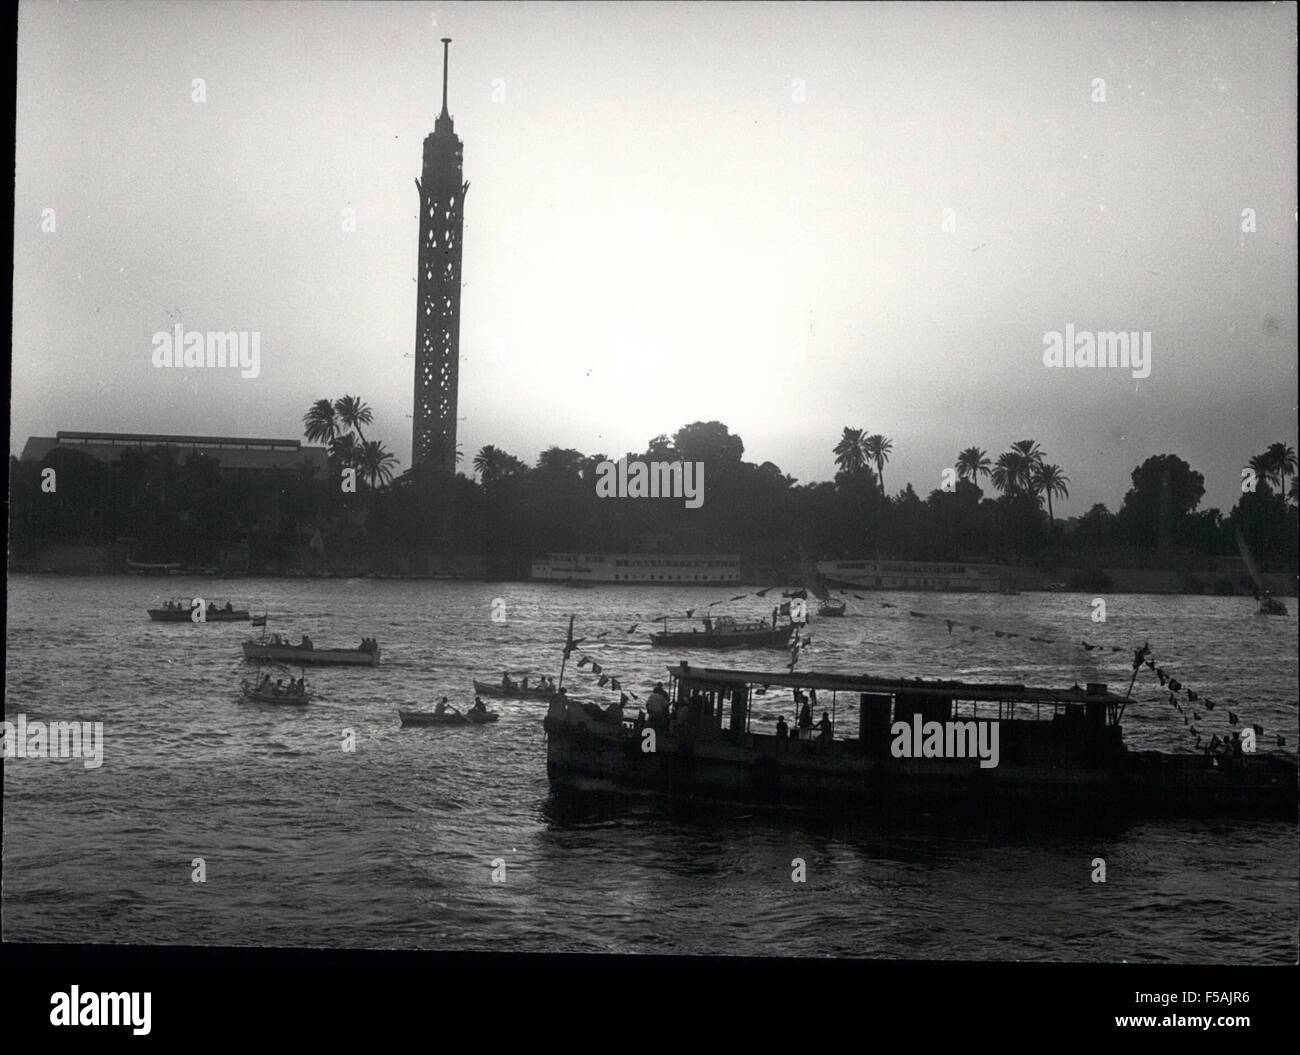 1968 - Wafa a El Nil Ceremony (end of the inundation period) River boats procession sailing in the Nile. Guezira Tower is seen in the background. In old days, during the Pharonic ages, it was the custom to throw to the Nile a virgin as a sacrifice to the idolized river. With Islam, the brutal tradition was abolished and a dummy of a girl was used instead. © Keystone Pictures USA/ZUMAPRESS.com/Alamy Live News Stock Photo